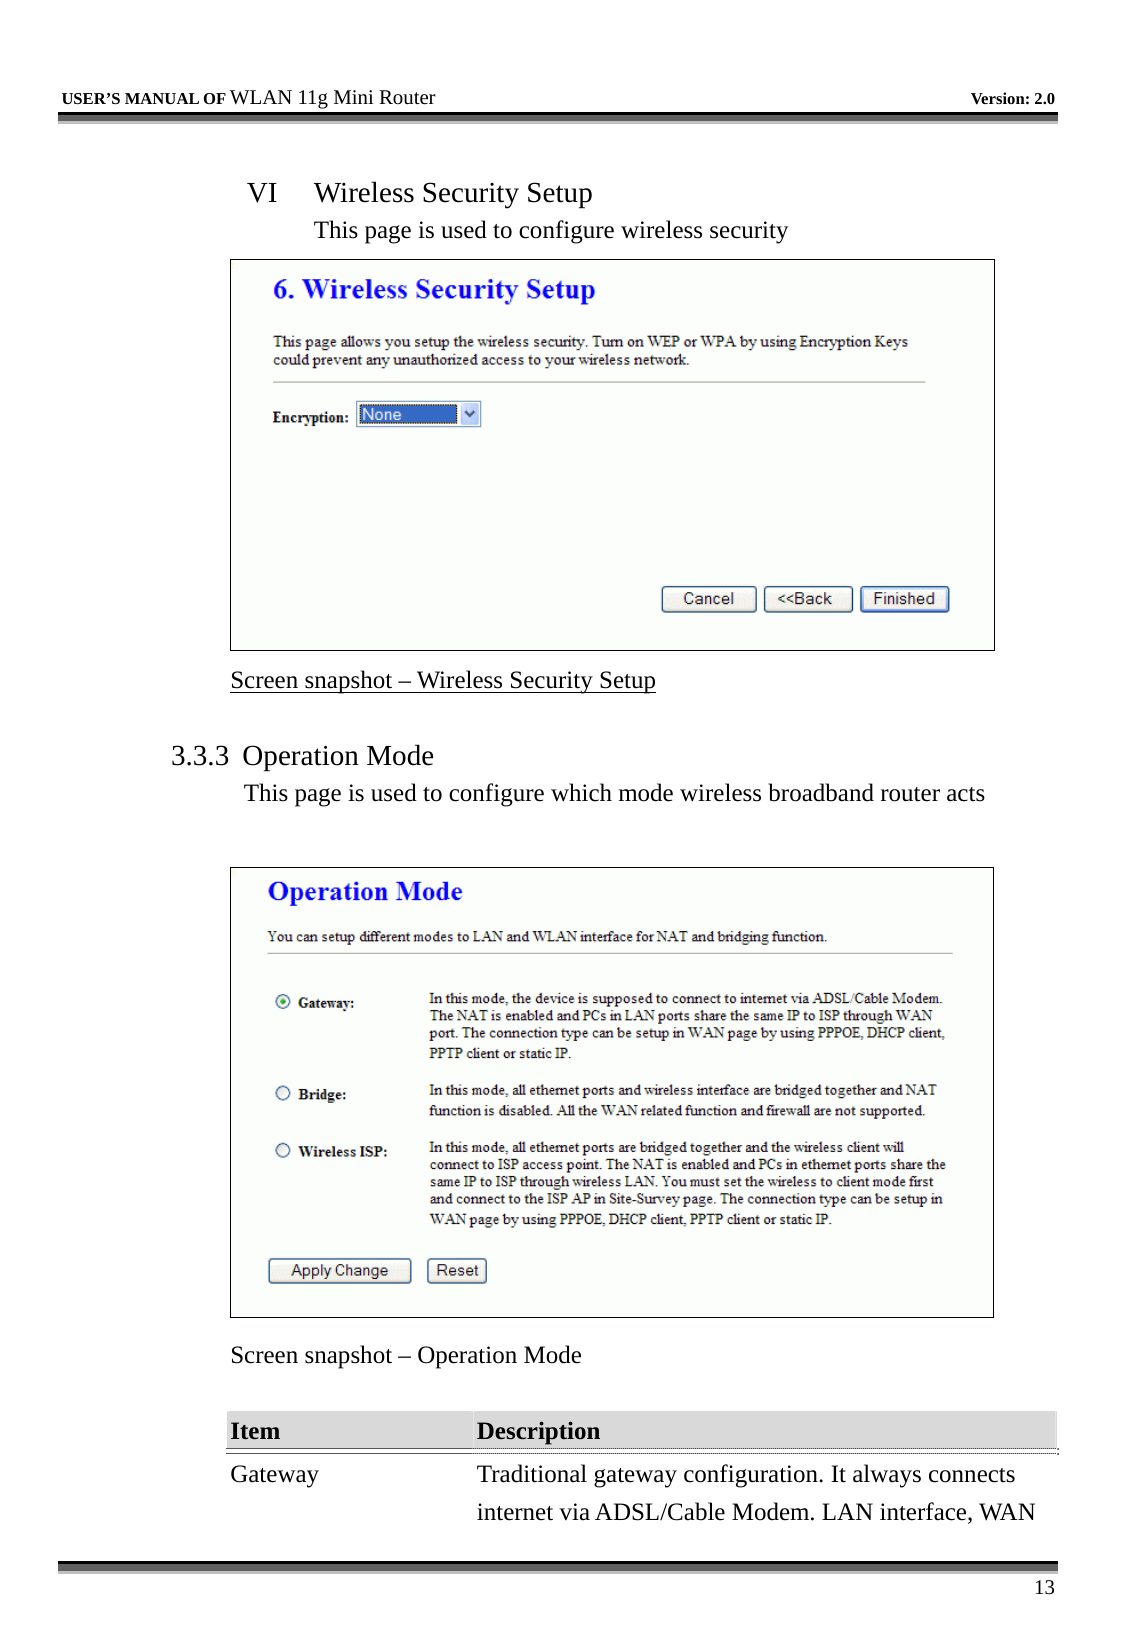   USER’S MANUAL OF WLAN 11g Mini Router   Version: 2.0     13  VI  Wireless Security Setup This page is used to configure wireless security  Screen snapshot – Wireless Security Setup  3.3.3 Operation Mode This page is used to configure which mode wireless broadband router acts   Screen snapshot – Operation Mode  Item  Description   Gateway  Traditional gateway configuration. It always connects internet via ADSL/Cable Modem. LAN interface, WAN 